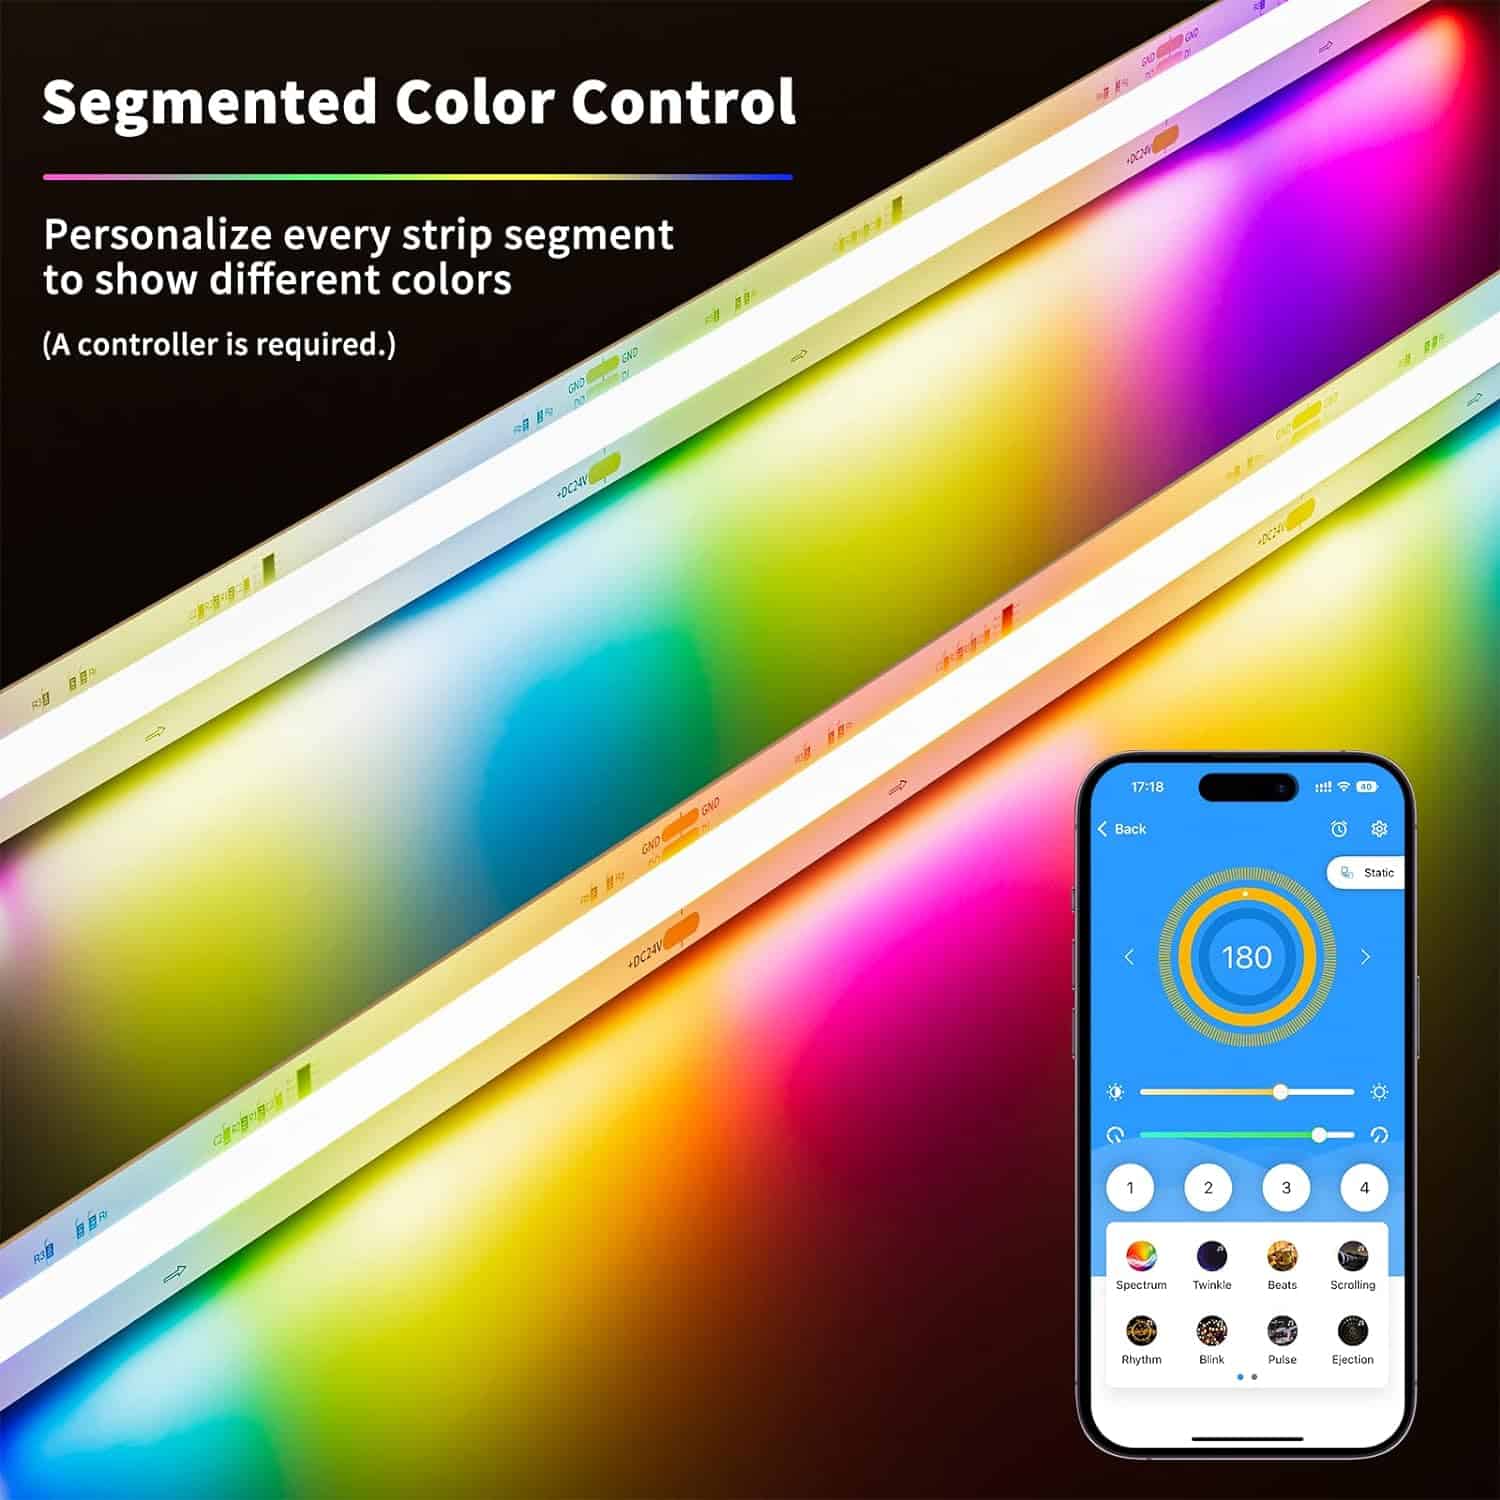 PAUTIX IP65 Waterproof RGB Smart IC COB LED Strip Light Addressable 24ft/7.5m,24V Color Flowing Strip Light Multicolor Flexible Tape Light for TV,Room,Party DIY Decoration(Without ControllerAdapter)